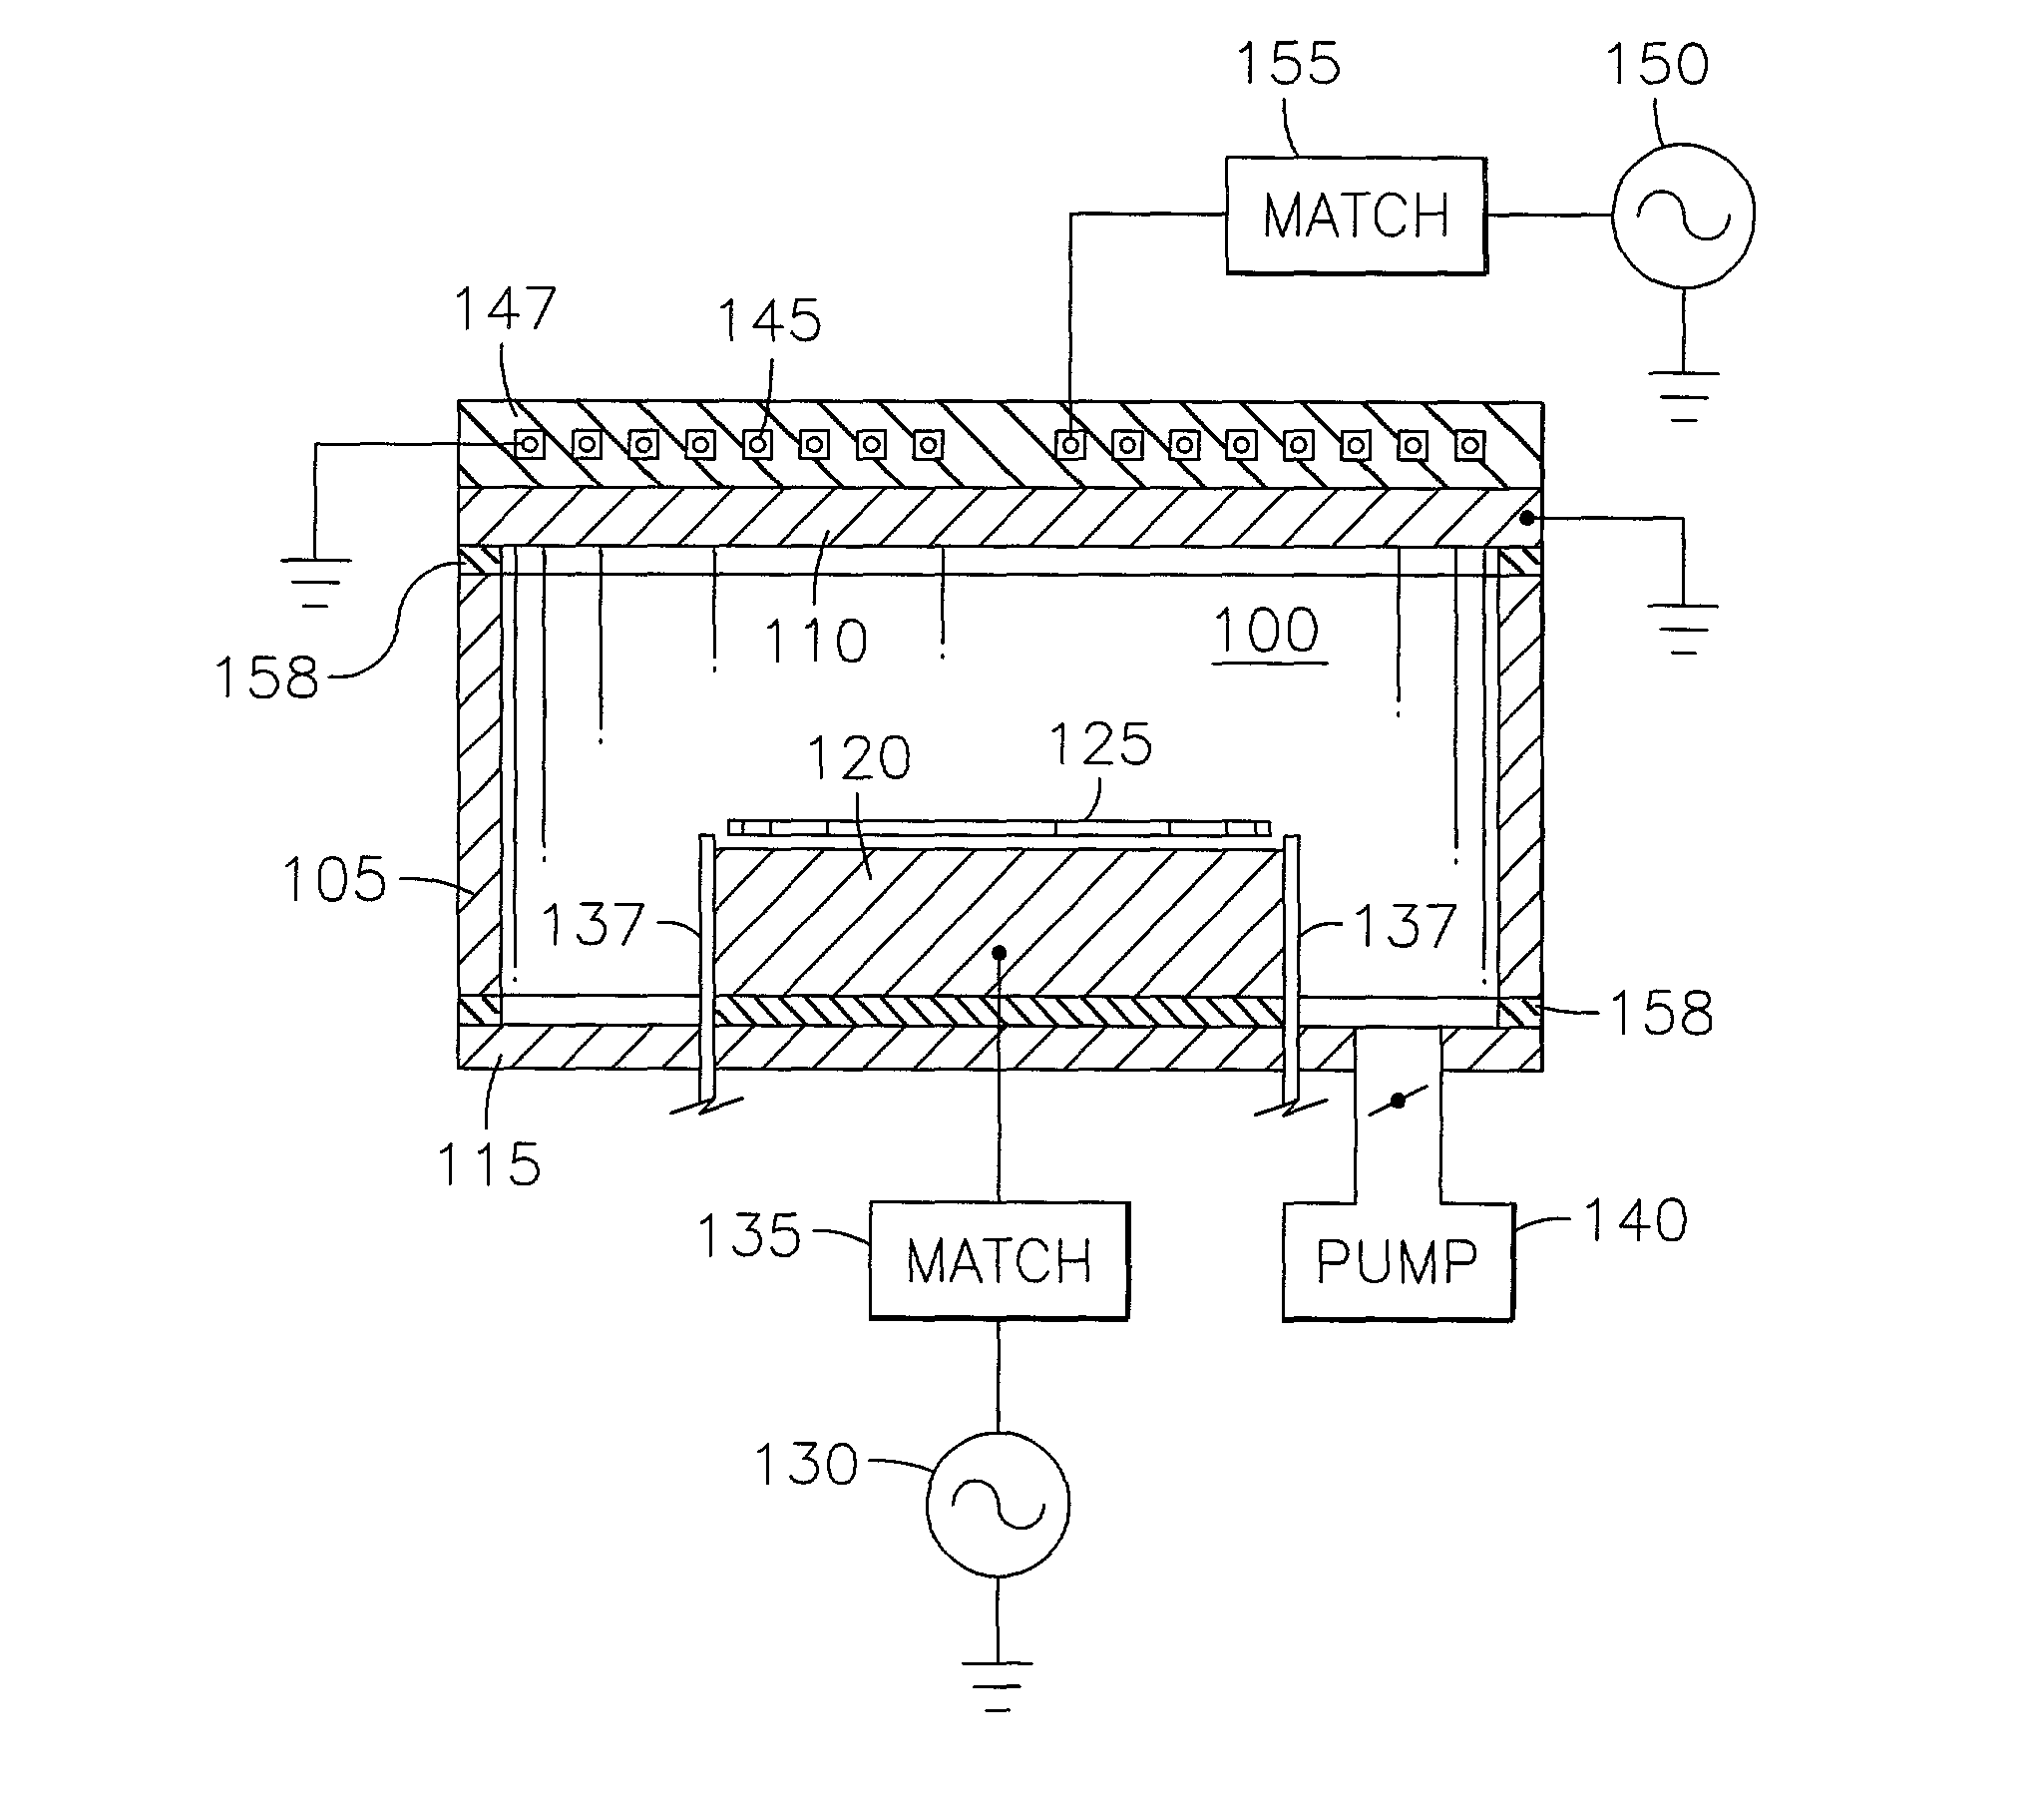 Parallel-plate electrode plasma reactor having an inductive antenna coupling power through a parallel plate electrode